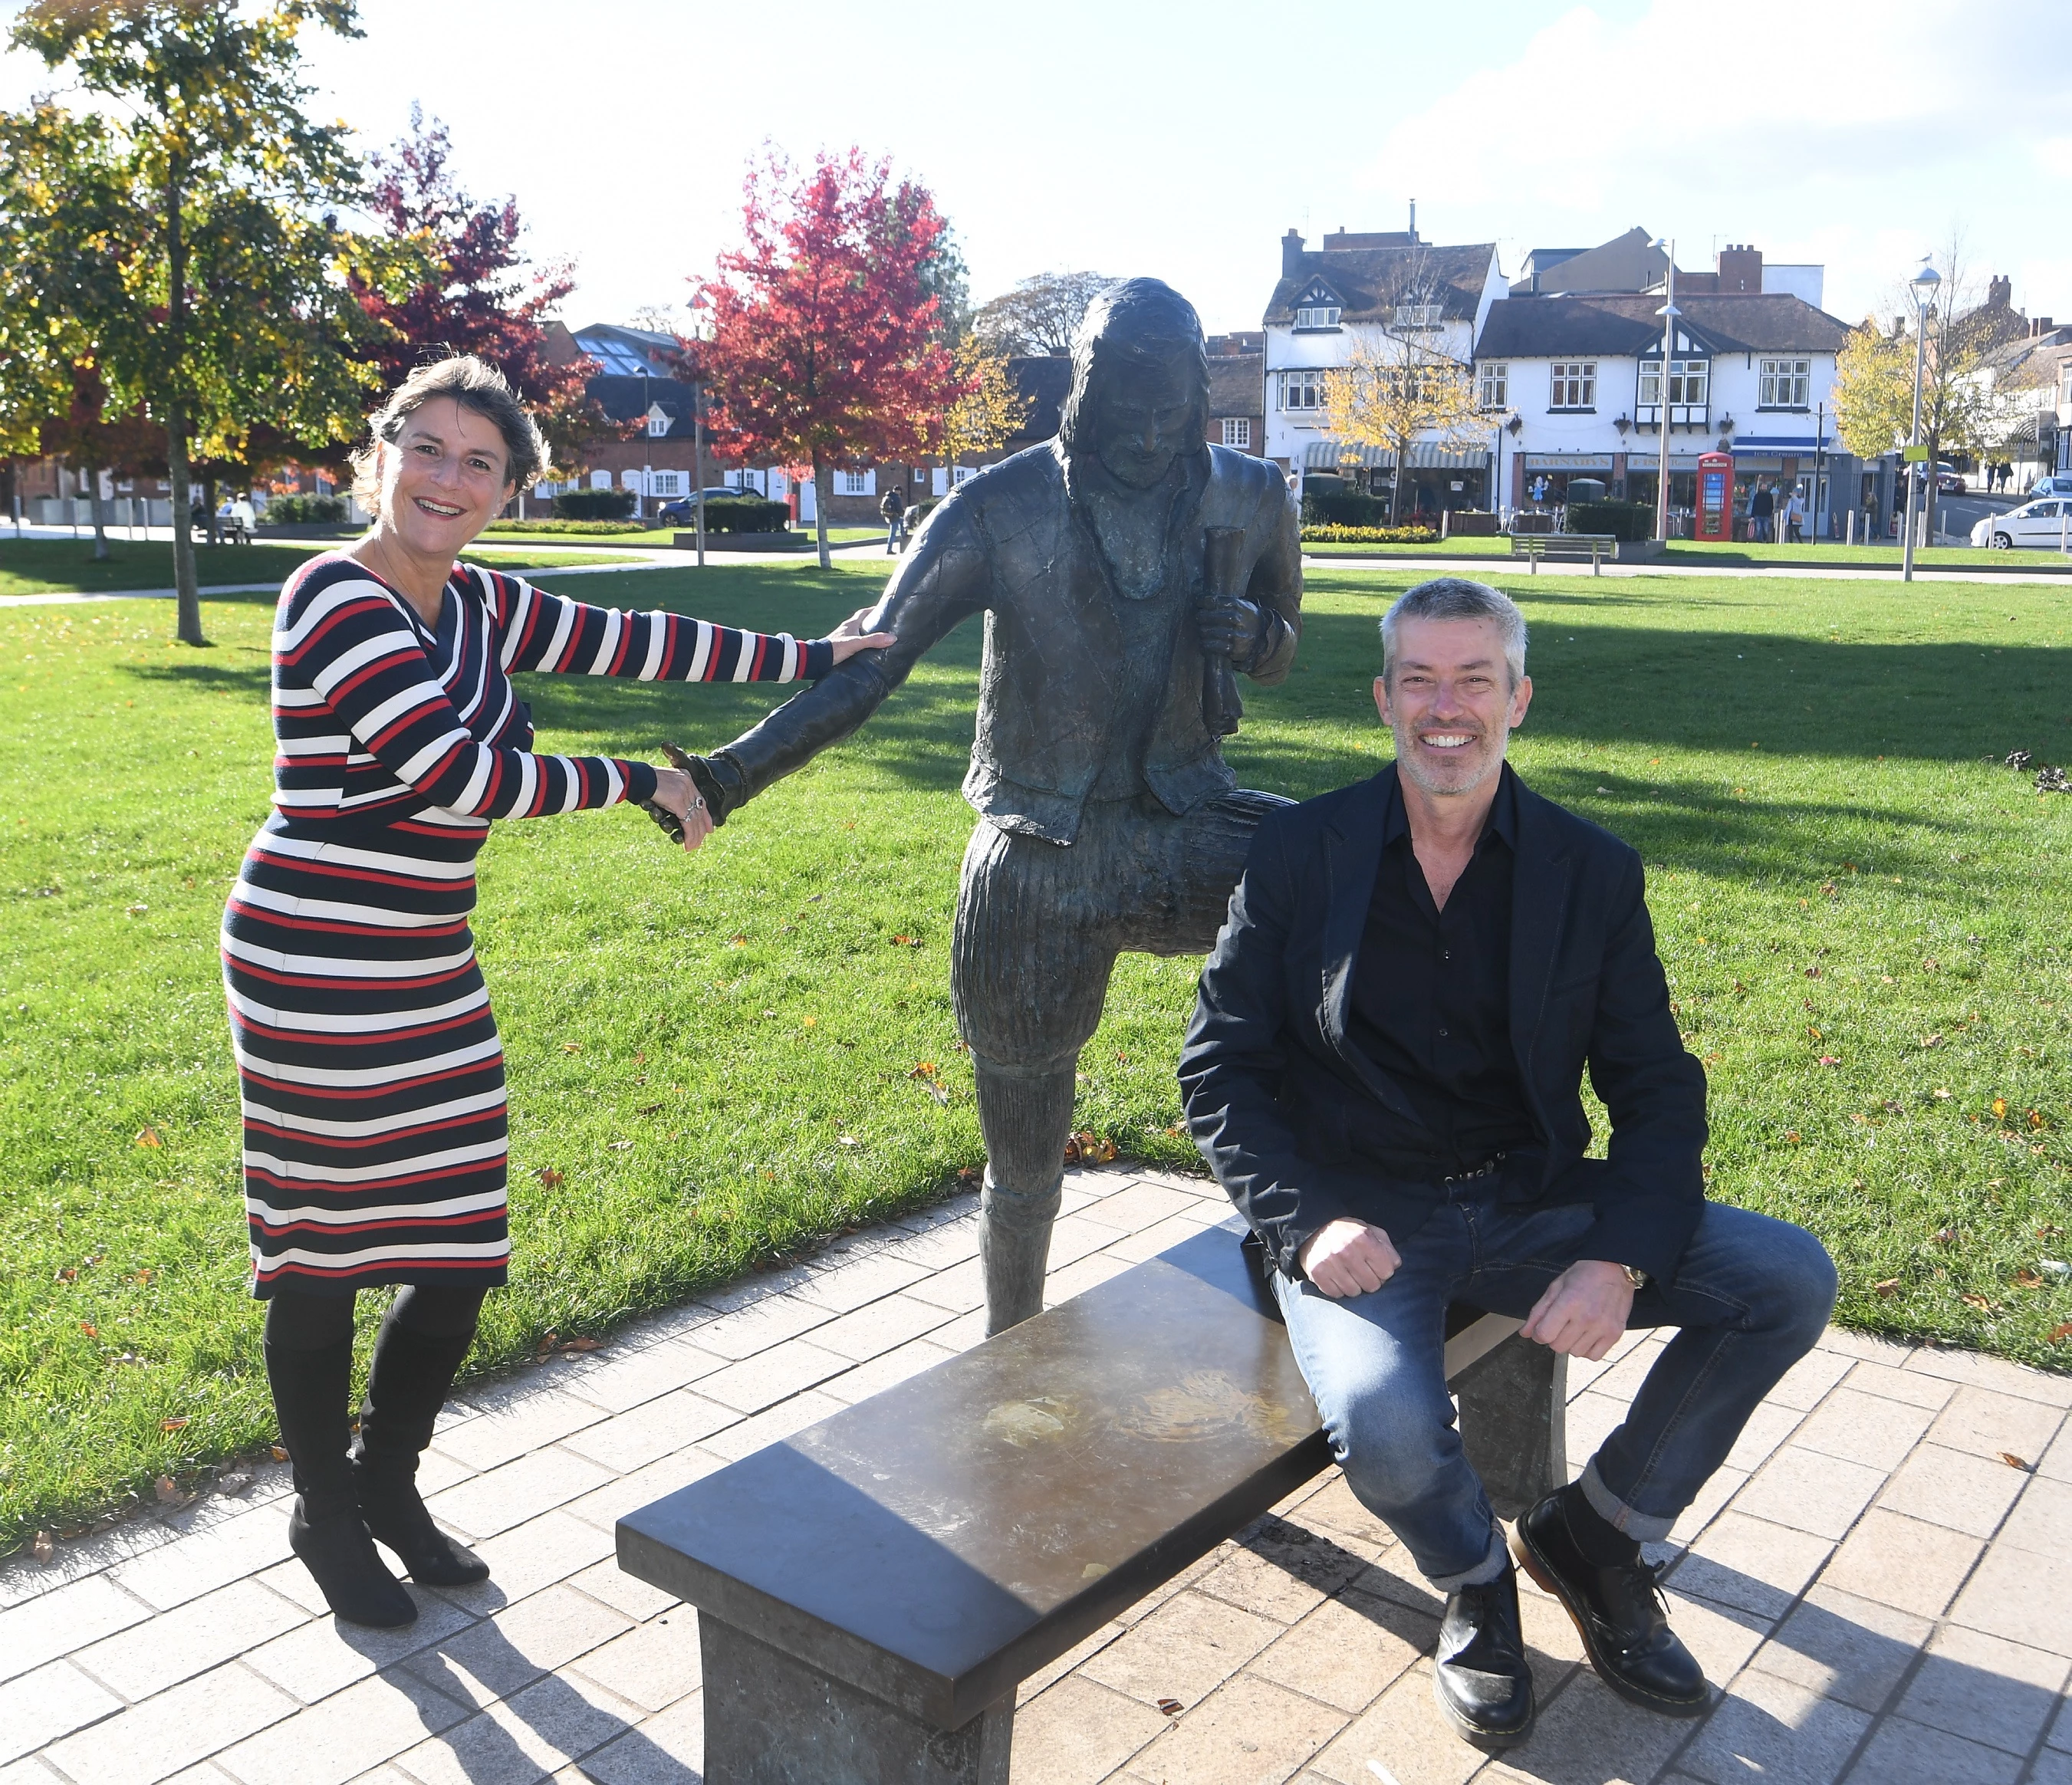 Helen Peters and Cllr Matt Jennings next to the ‘Young Will’ statue in Bancroft Gardens